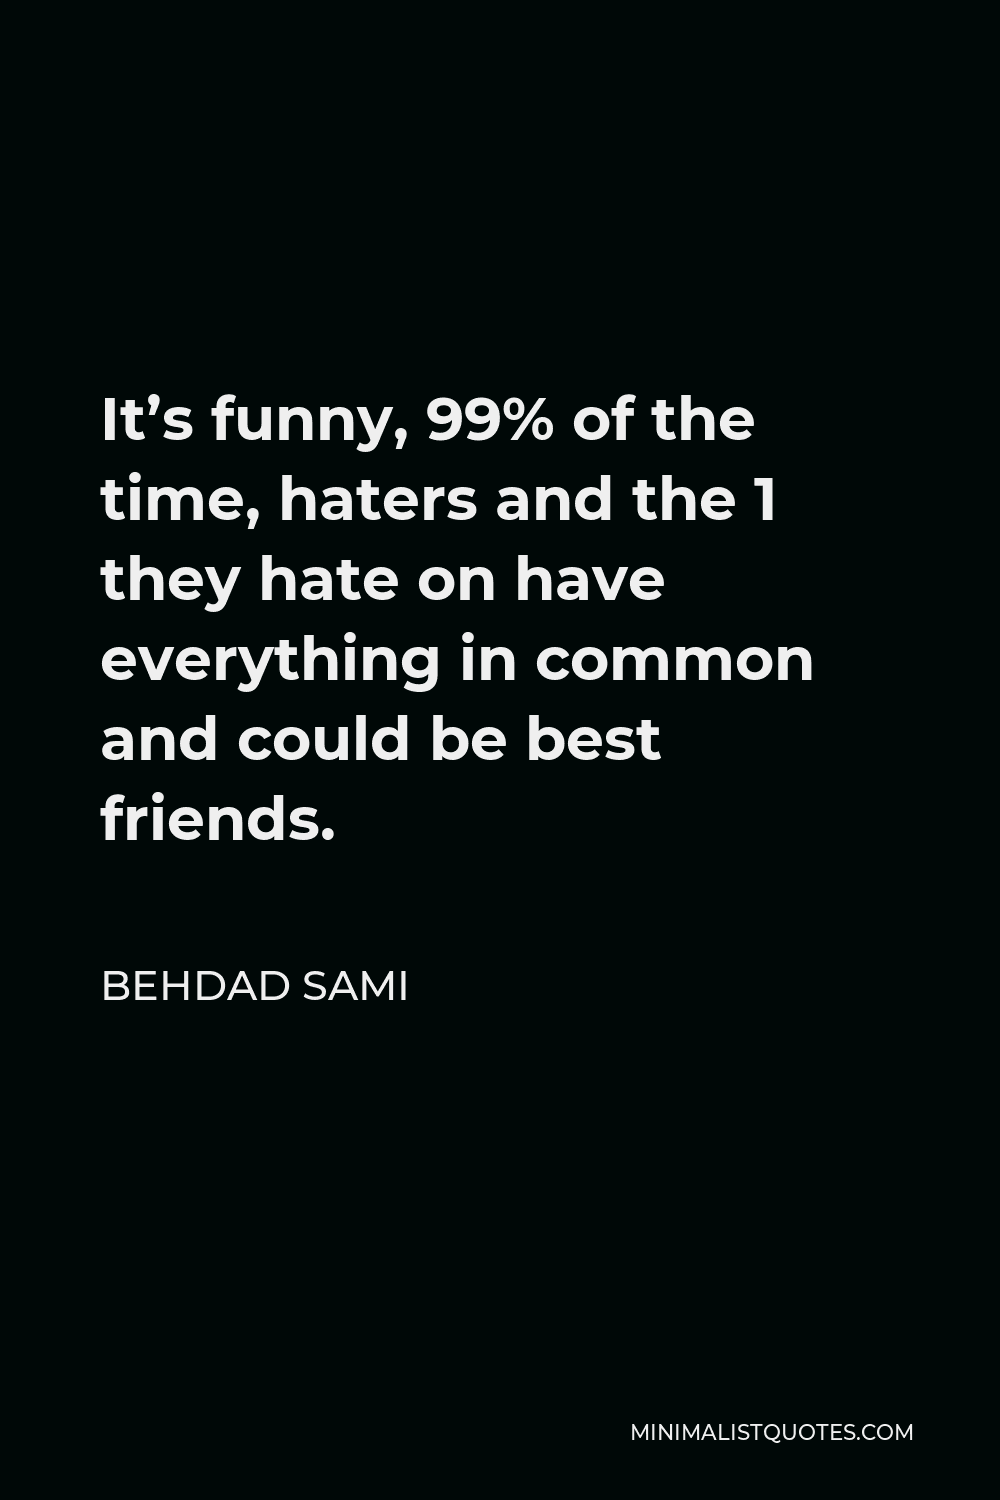 Behdad Sami Quote - It’s funny, 99% of the time, haters and the 1 they hate on have everything in common and could be best friends.